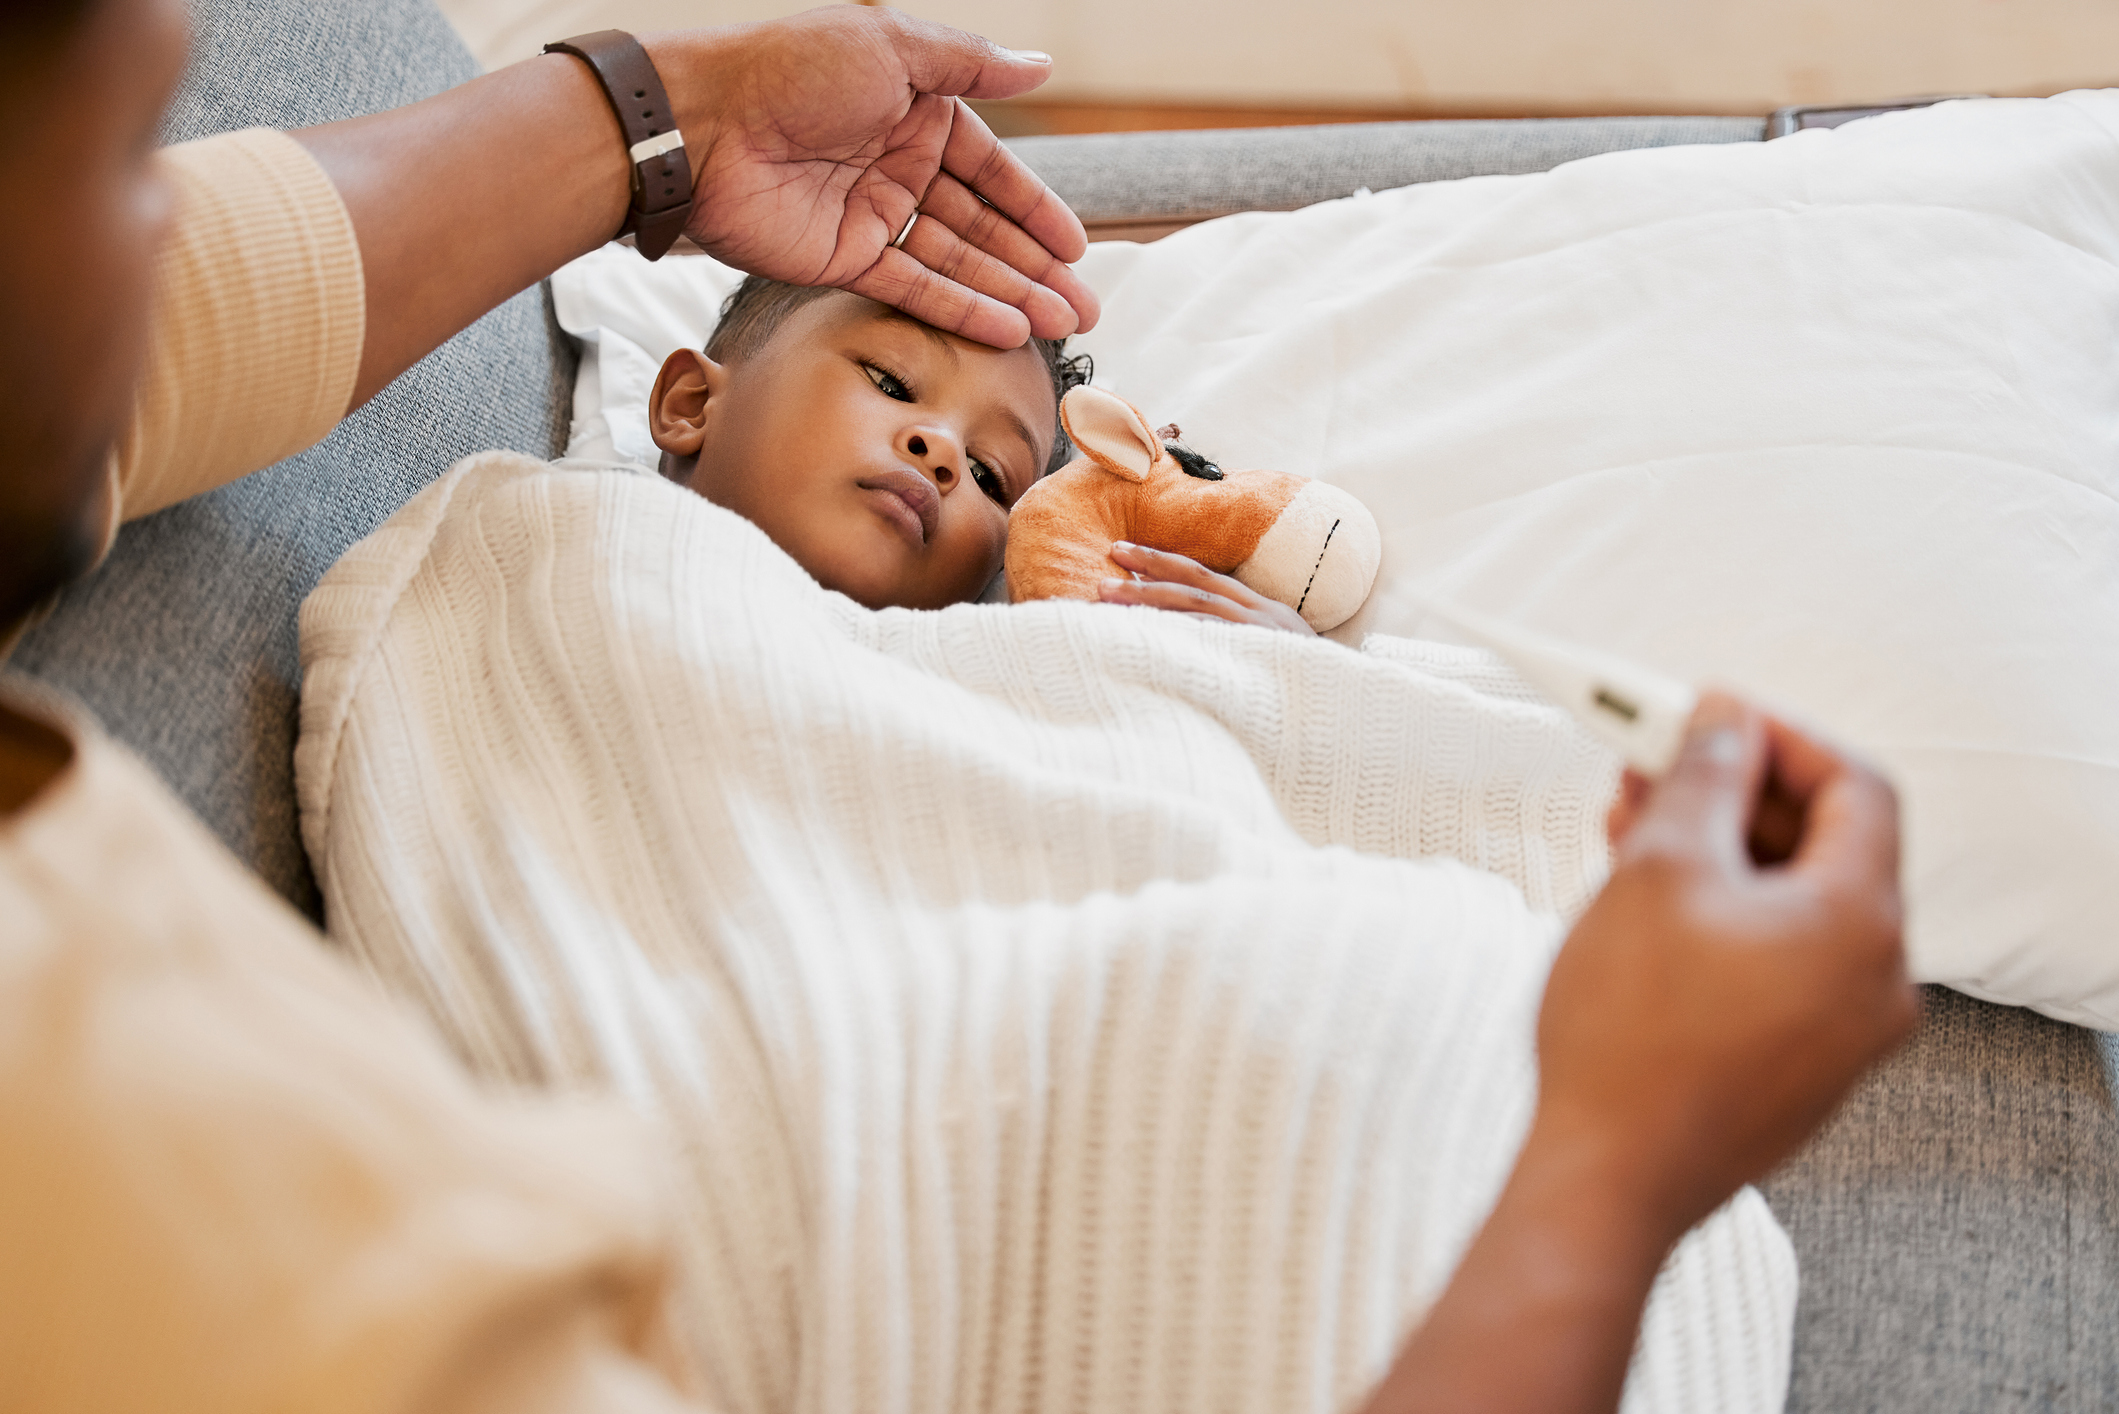 How to Make Your Child Comfortable While They Recover From the Flu